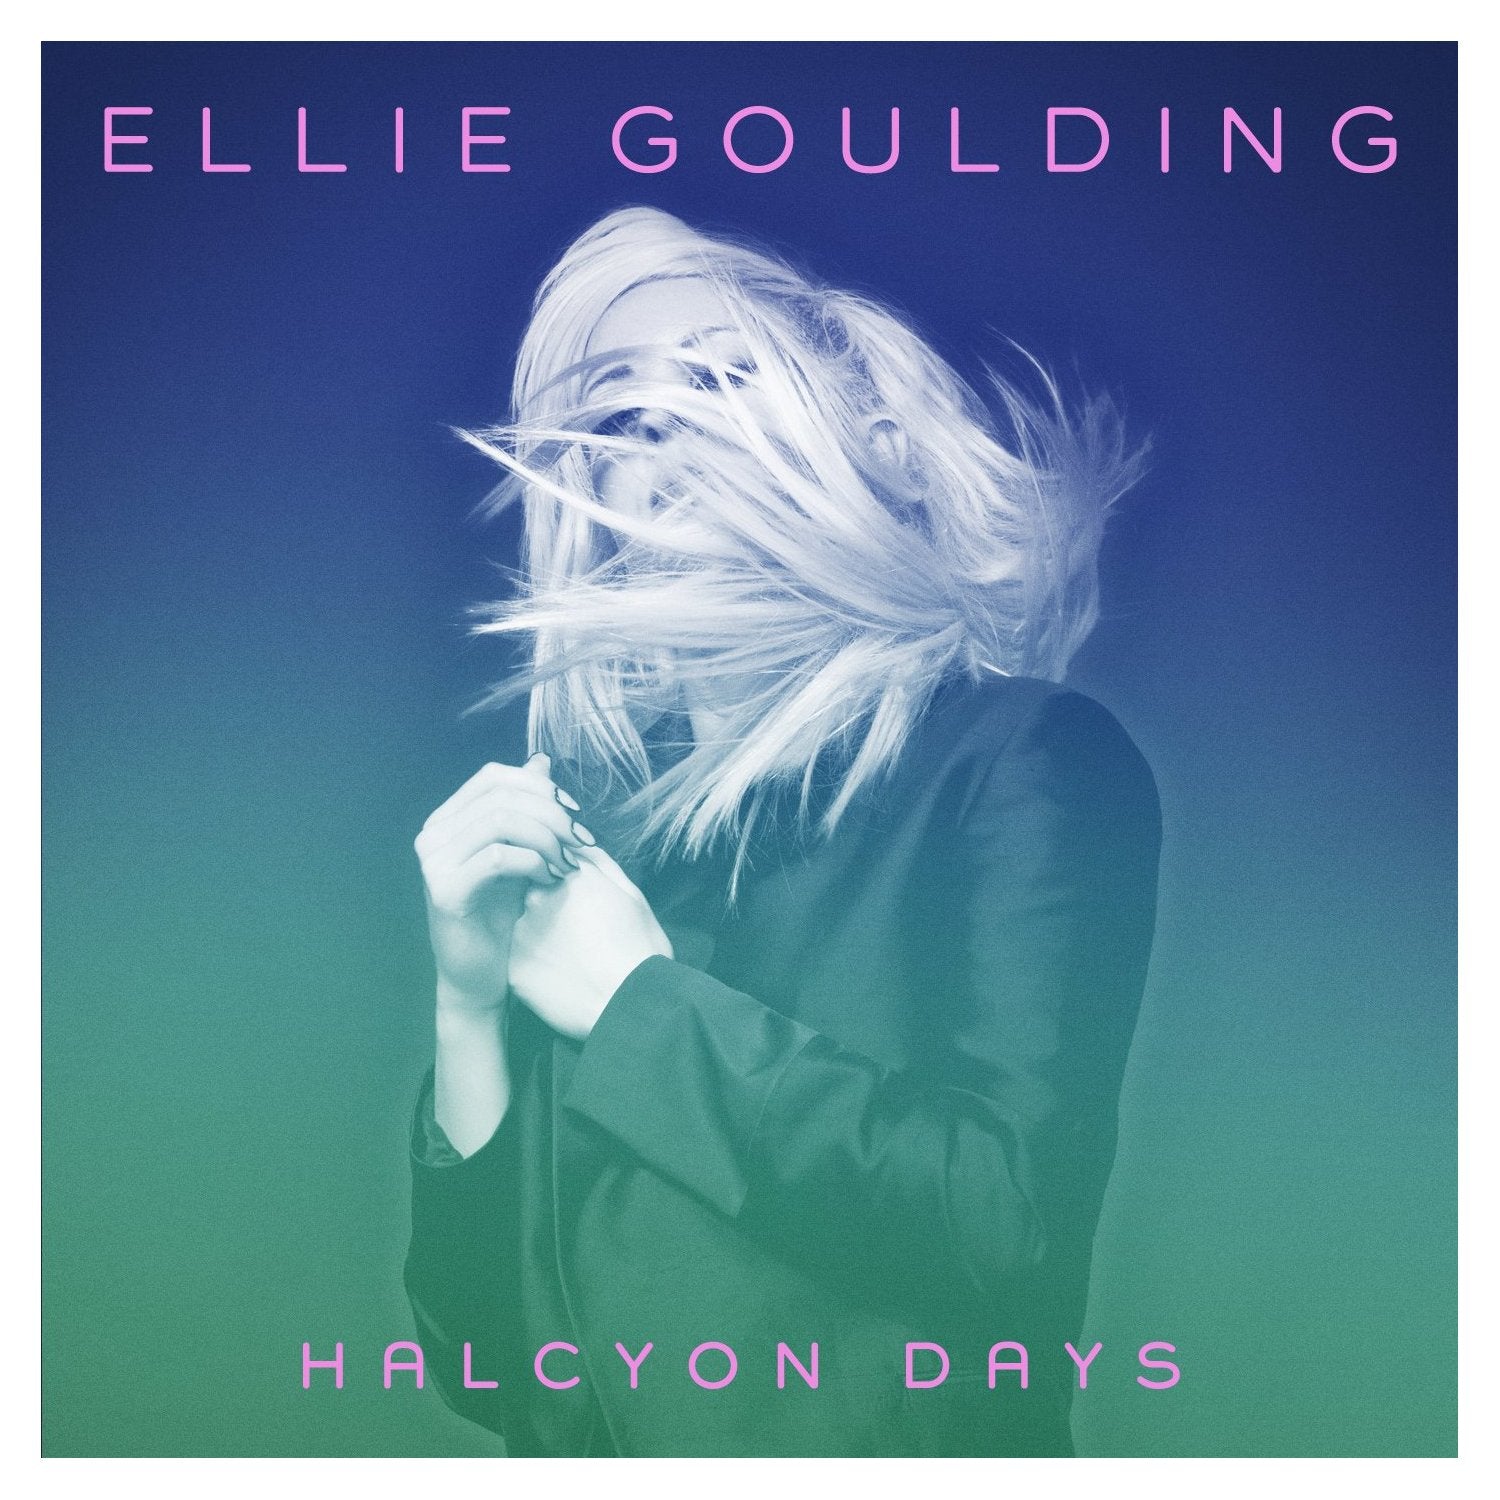 Ellie Goulding - Halcyon Days: Deluxe CD